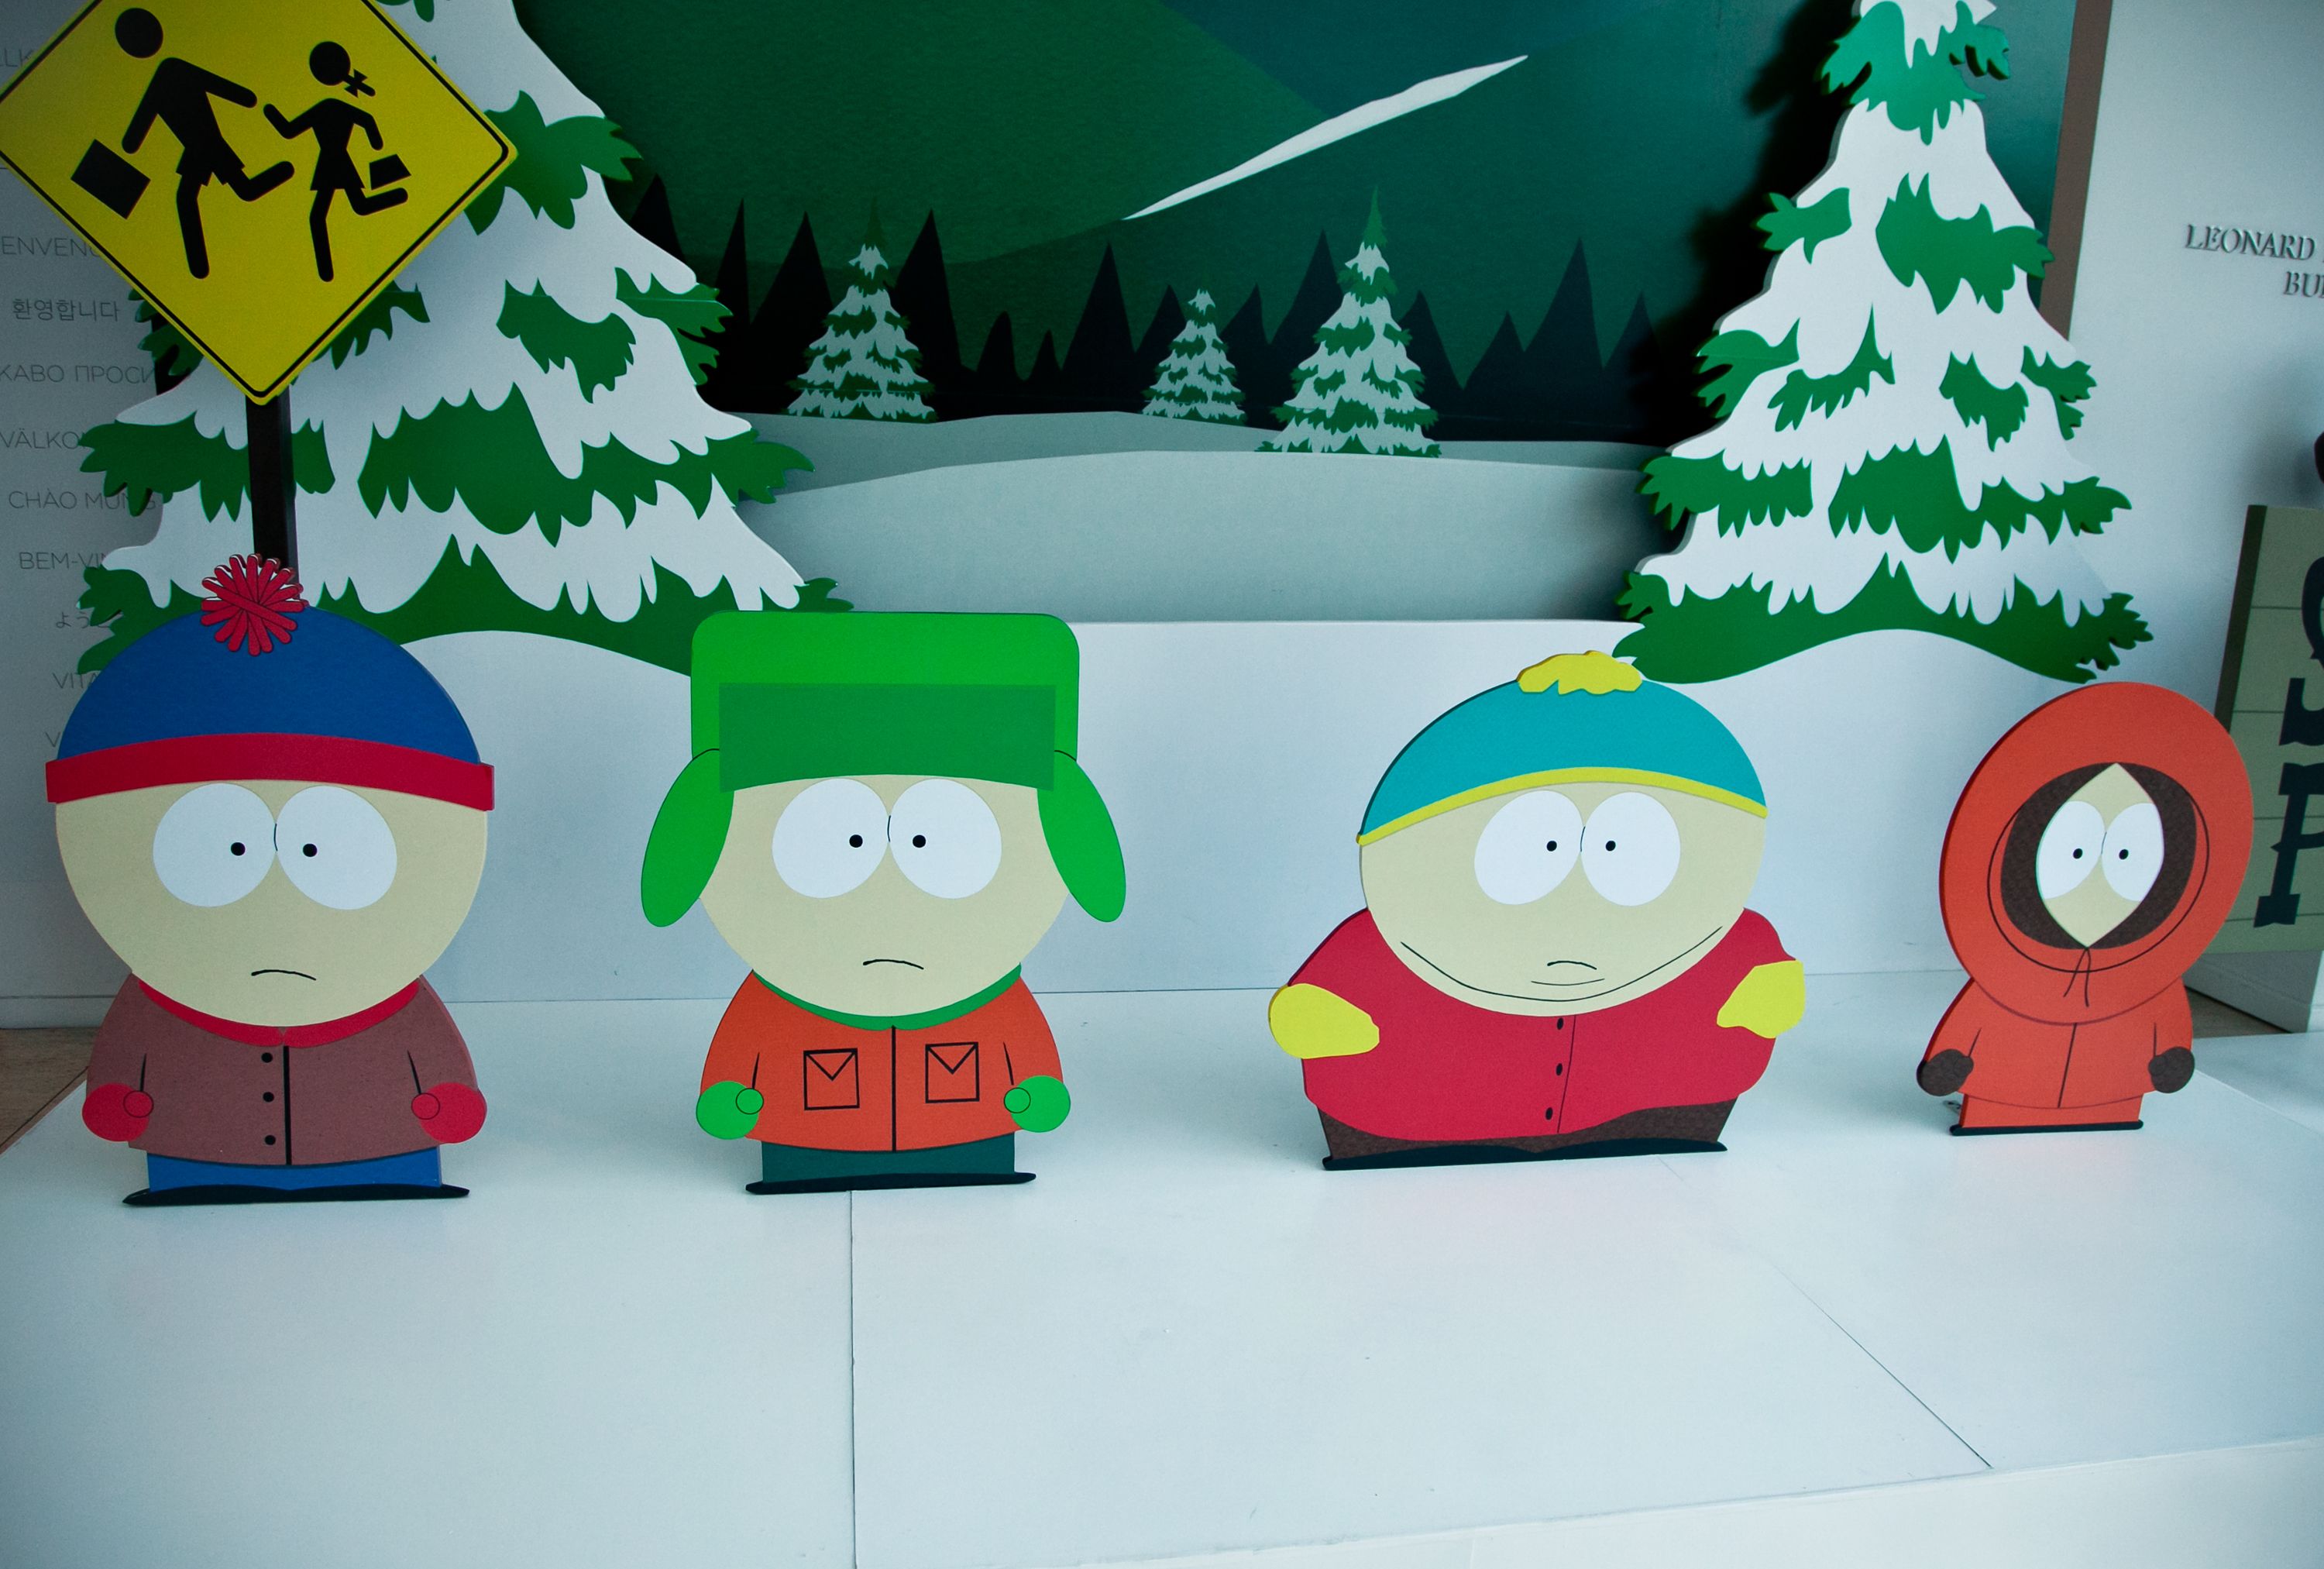 HBO Max will get ‘South Park’ unique streaming rights